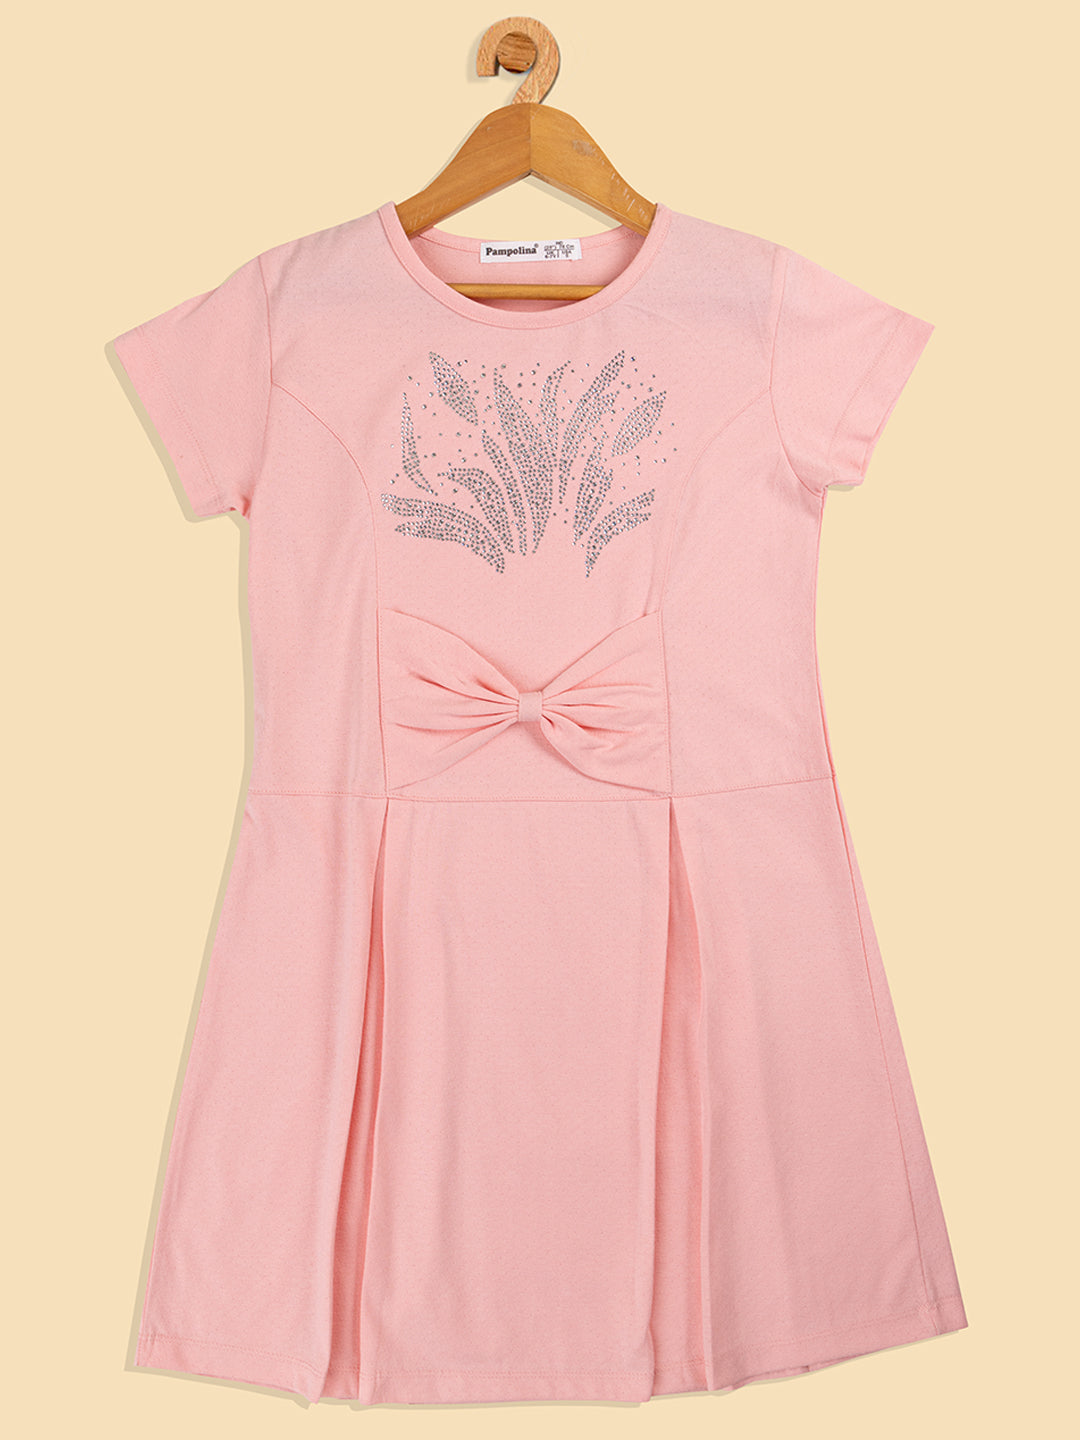 Pampolina  Printed Summer Cotton Dress For Baby Girl-Peach